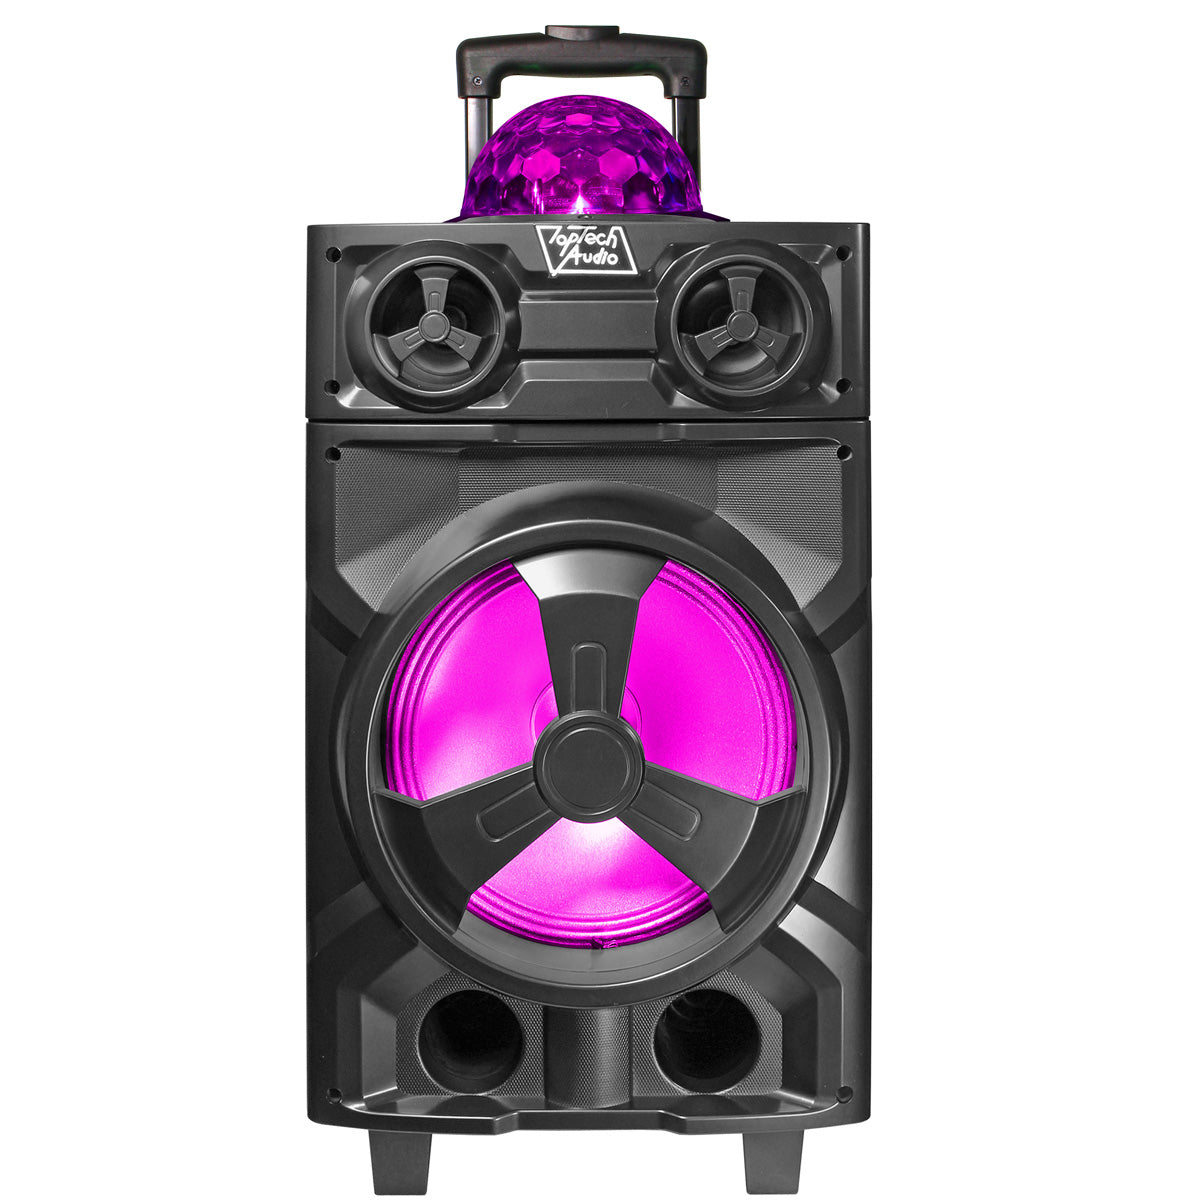 Fully Amplified Portable 1800 Watts Peak Power 10” Speaker with DISCO BALL